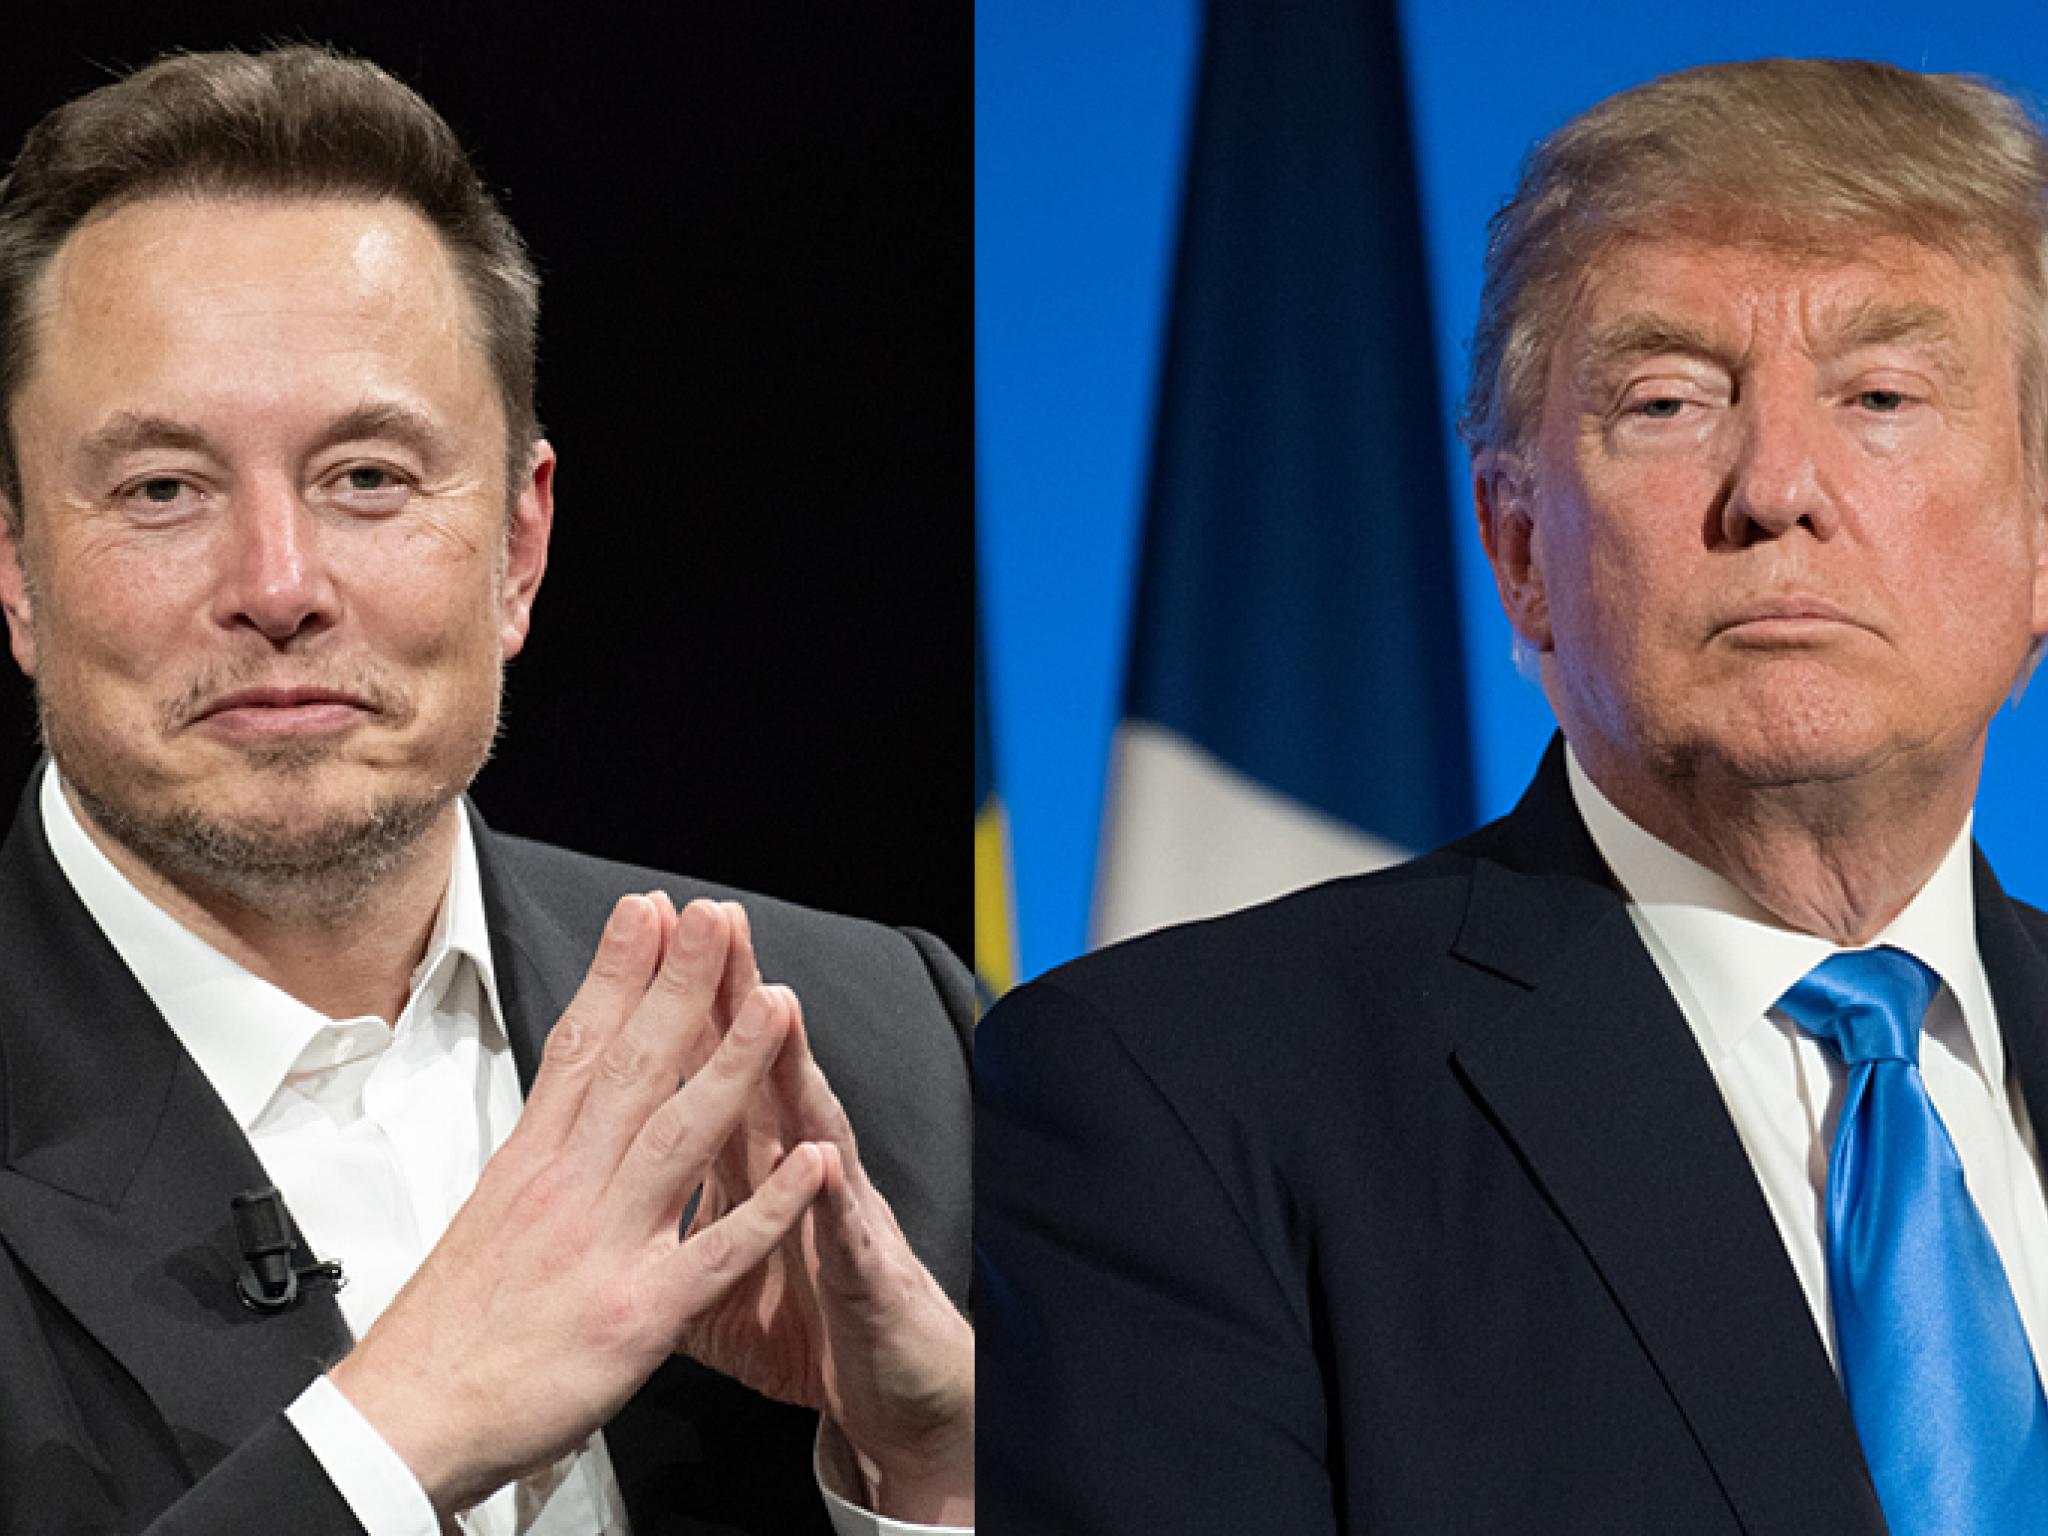  tesla-ceo-elon-musk-not-been-any-discussions-for-a-role-for-me-in-a-potential-trump-presidency 